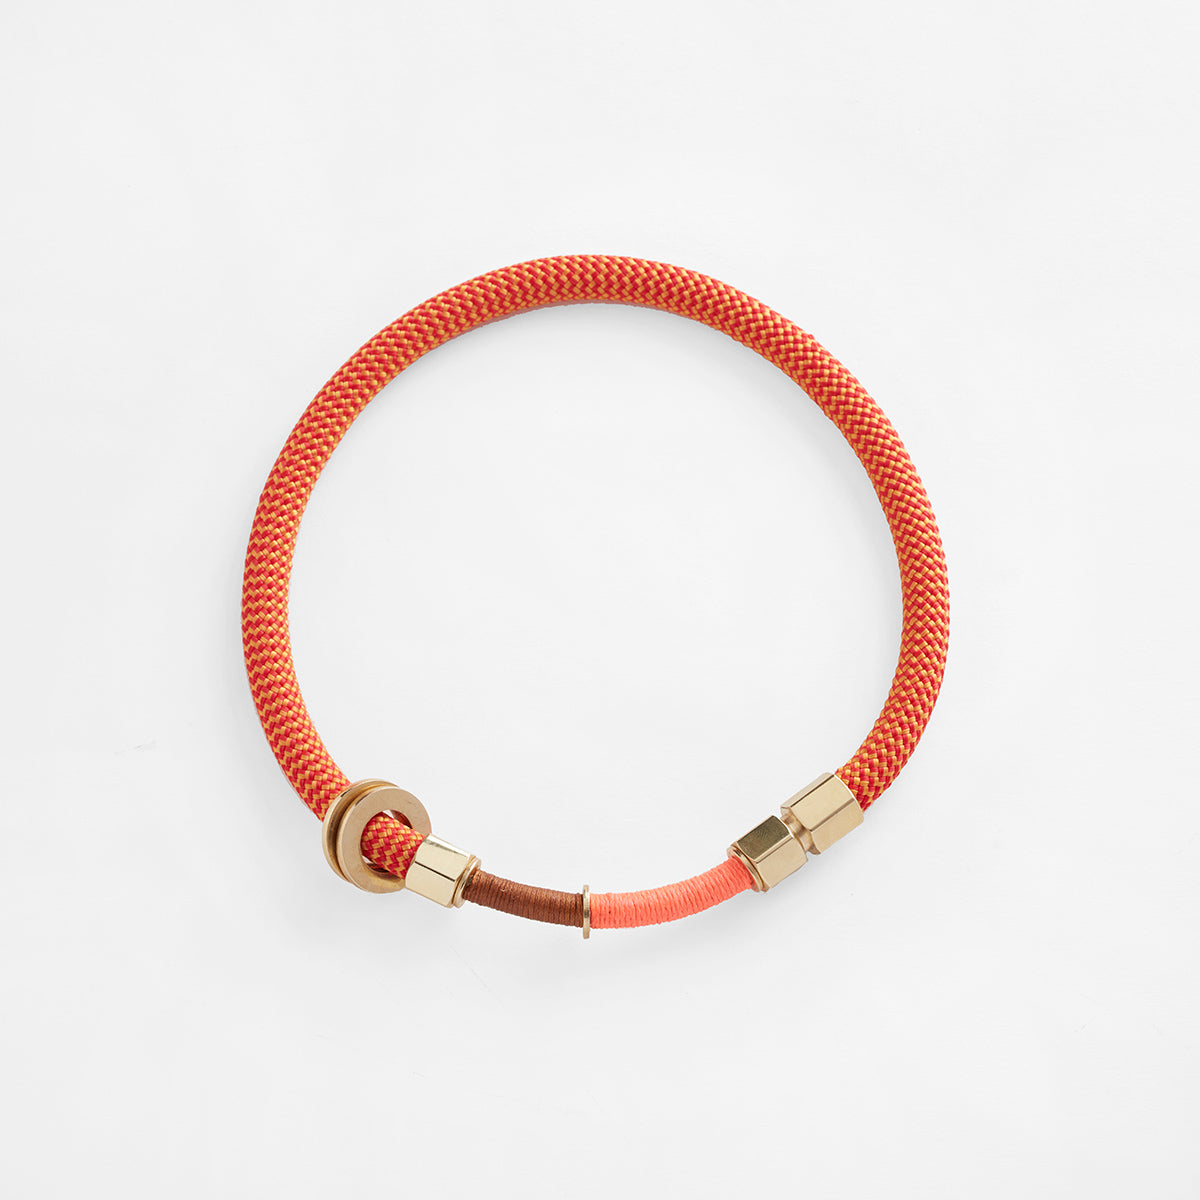 Pichulik | legacy Necklace Crafted in Rope and Brass